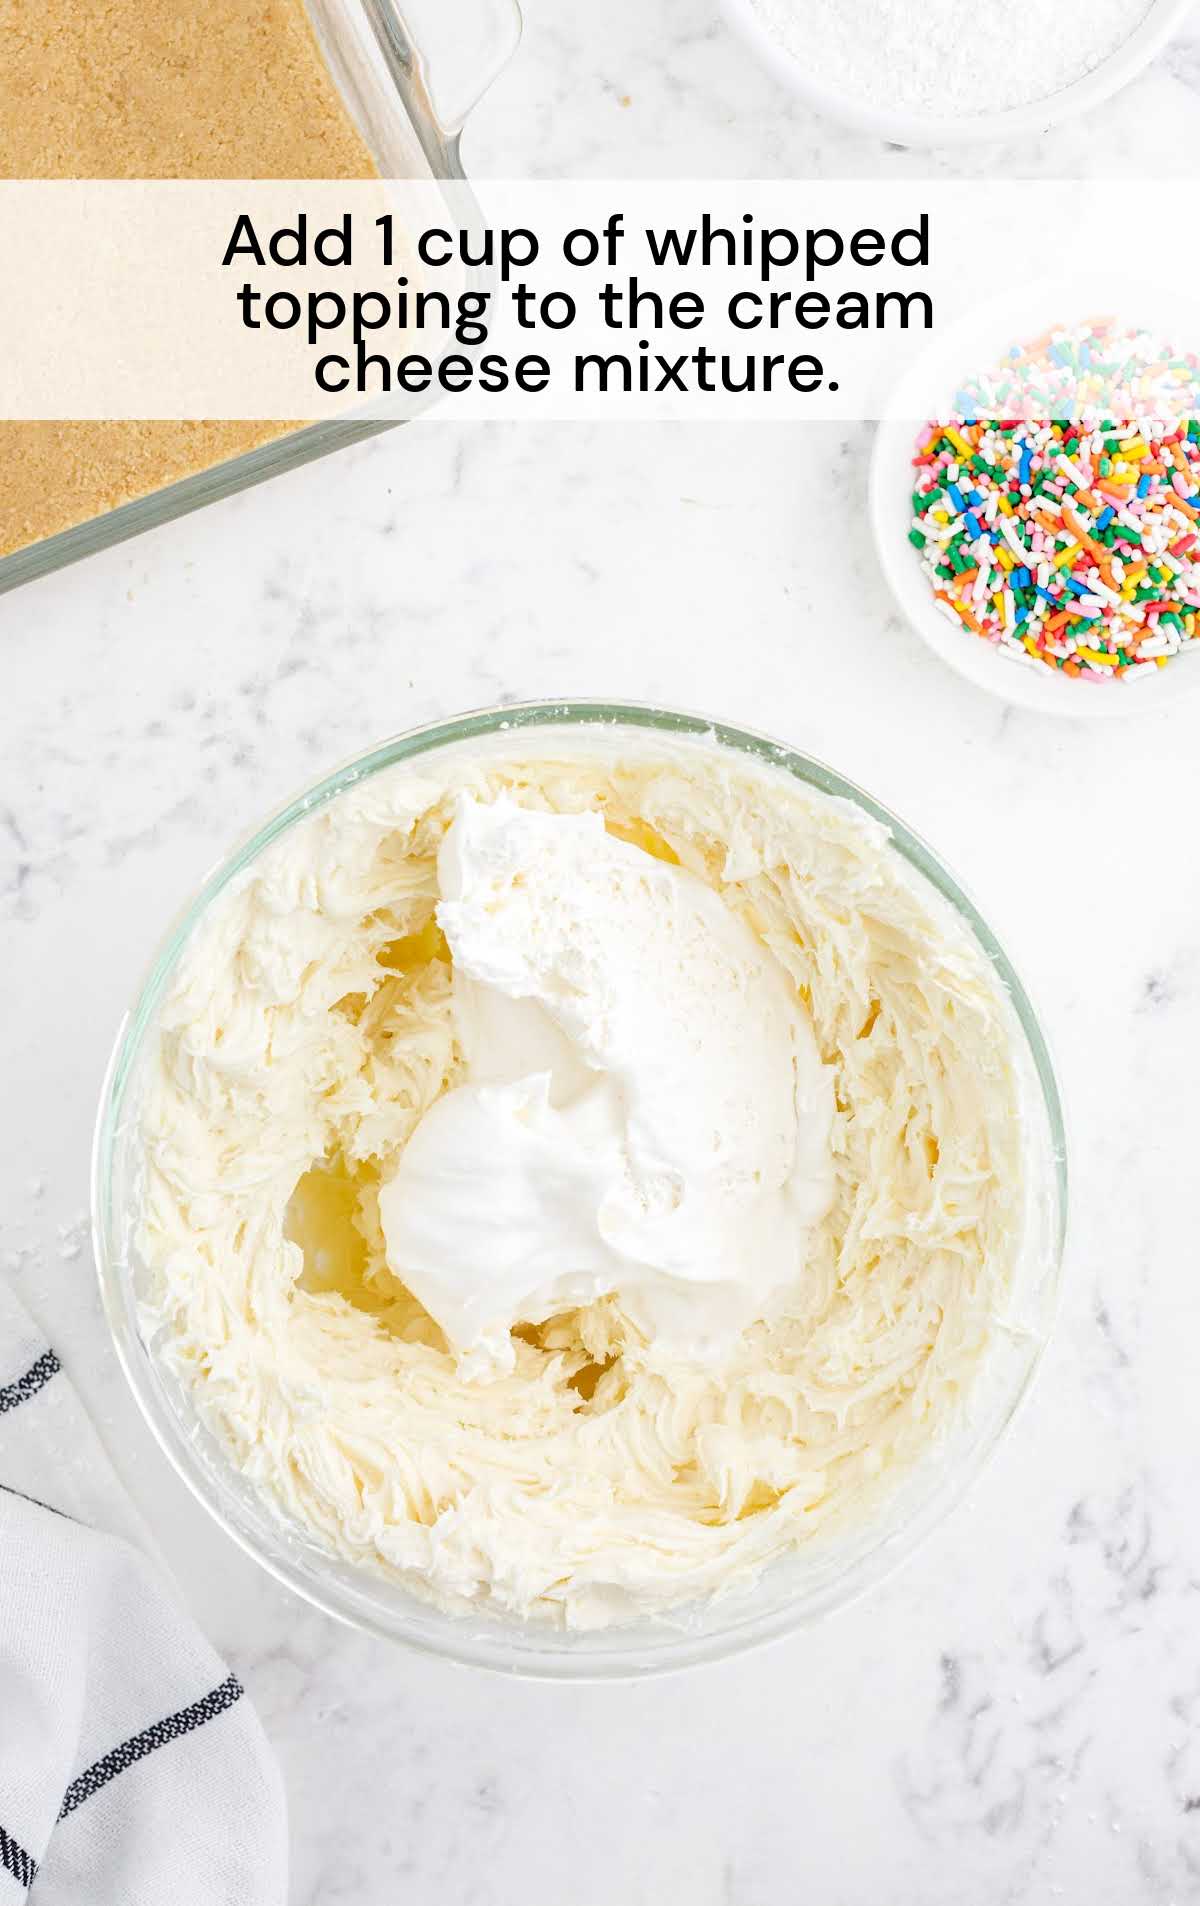 whipped topping added to the cream cheese in a bowl